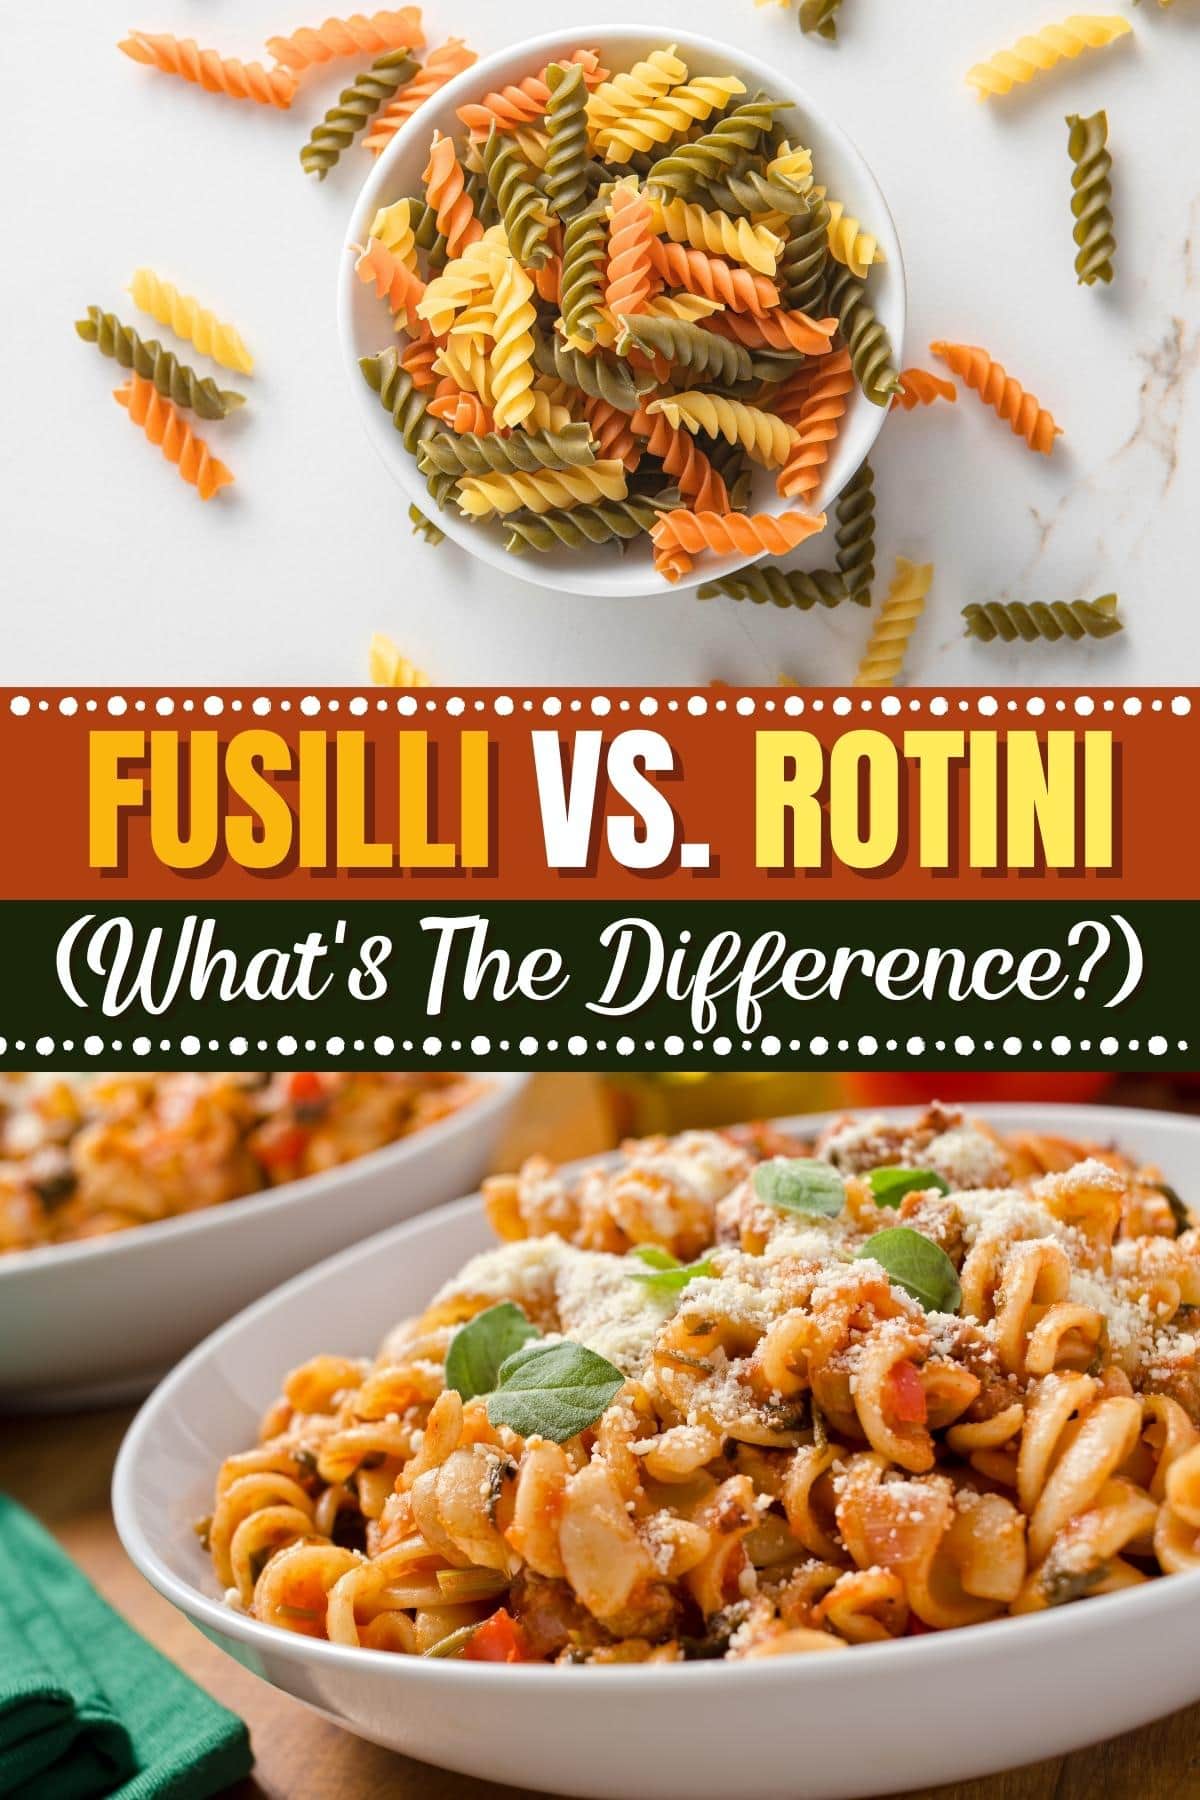 Fusilli vs. Rotini (What’s the Difference?)